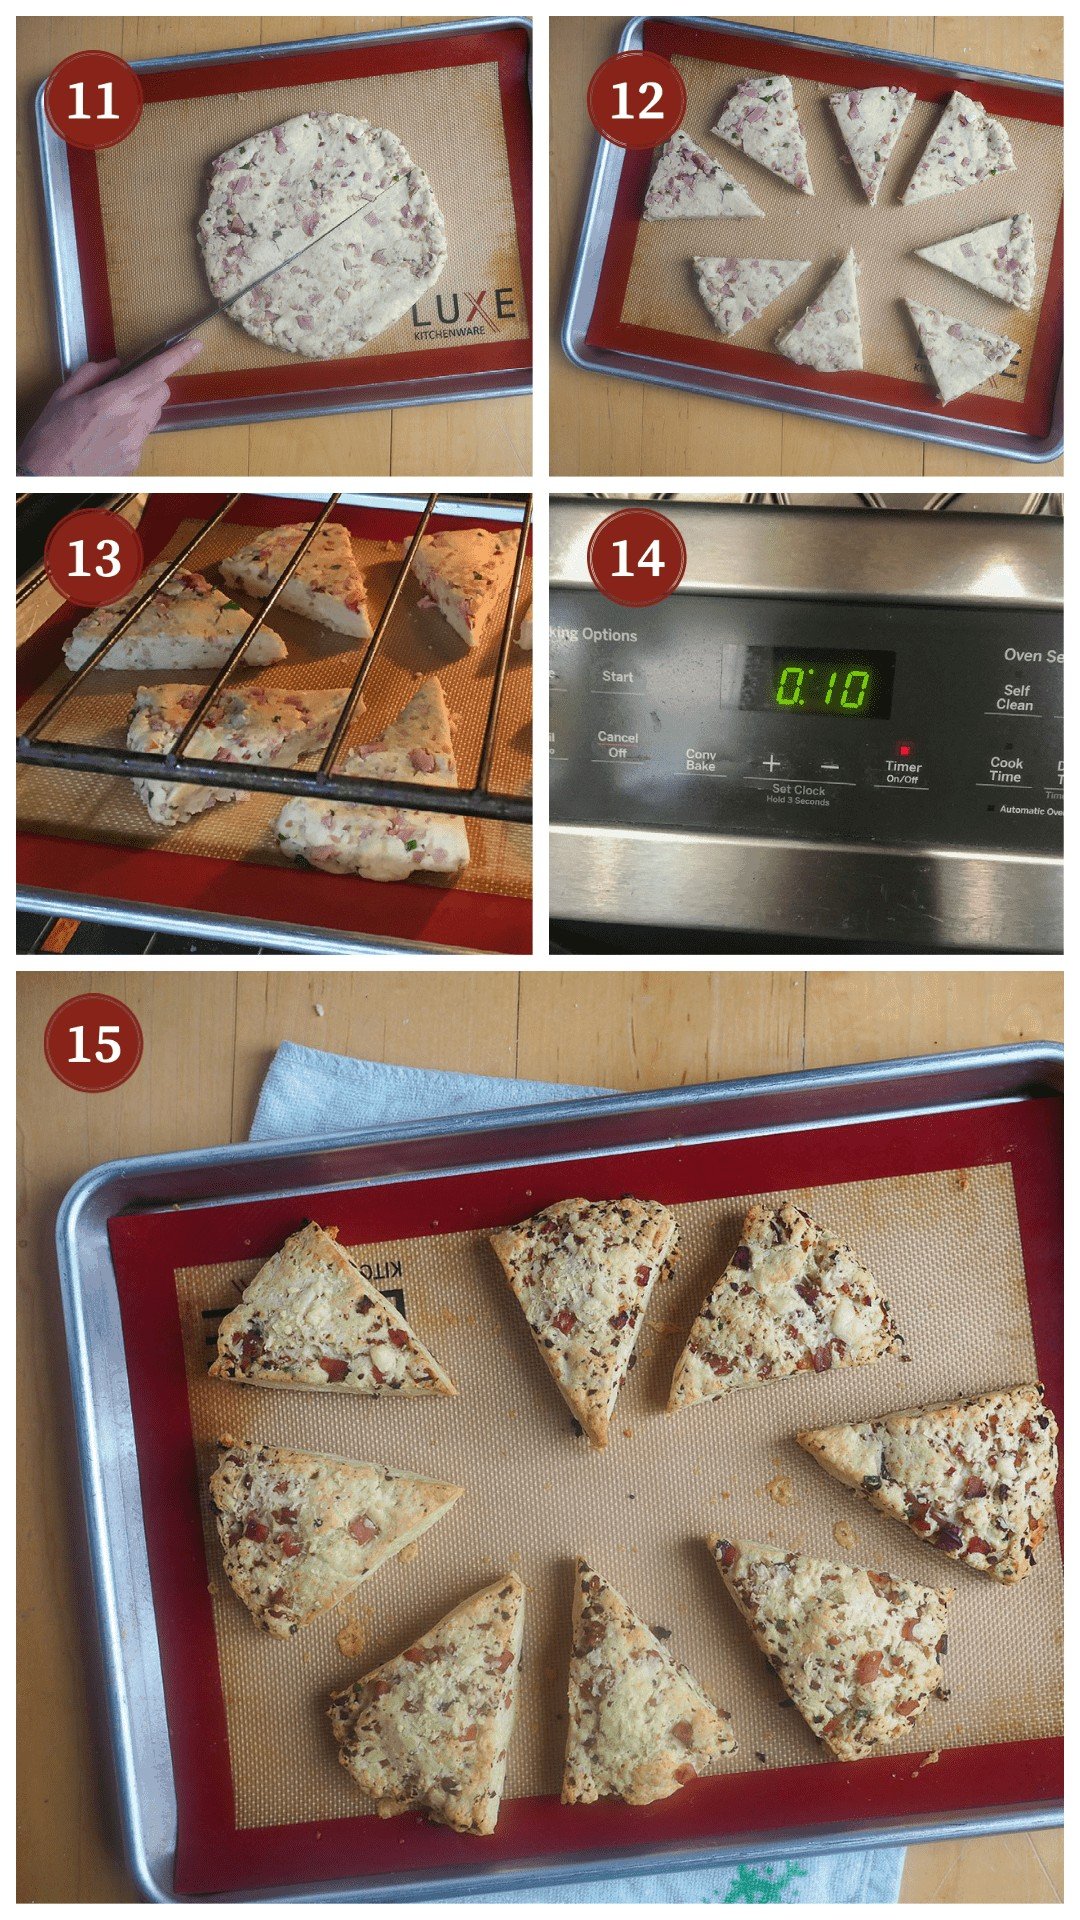 A collage of images showing how to make ham and cheese scones, steps 11 - 15.